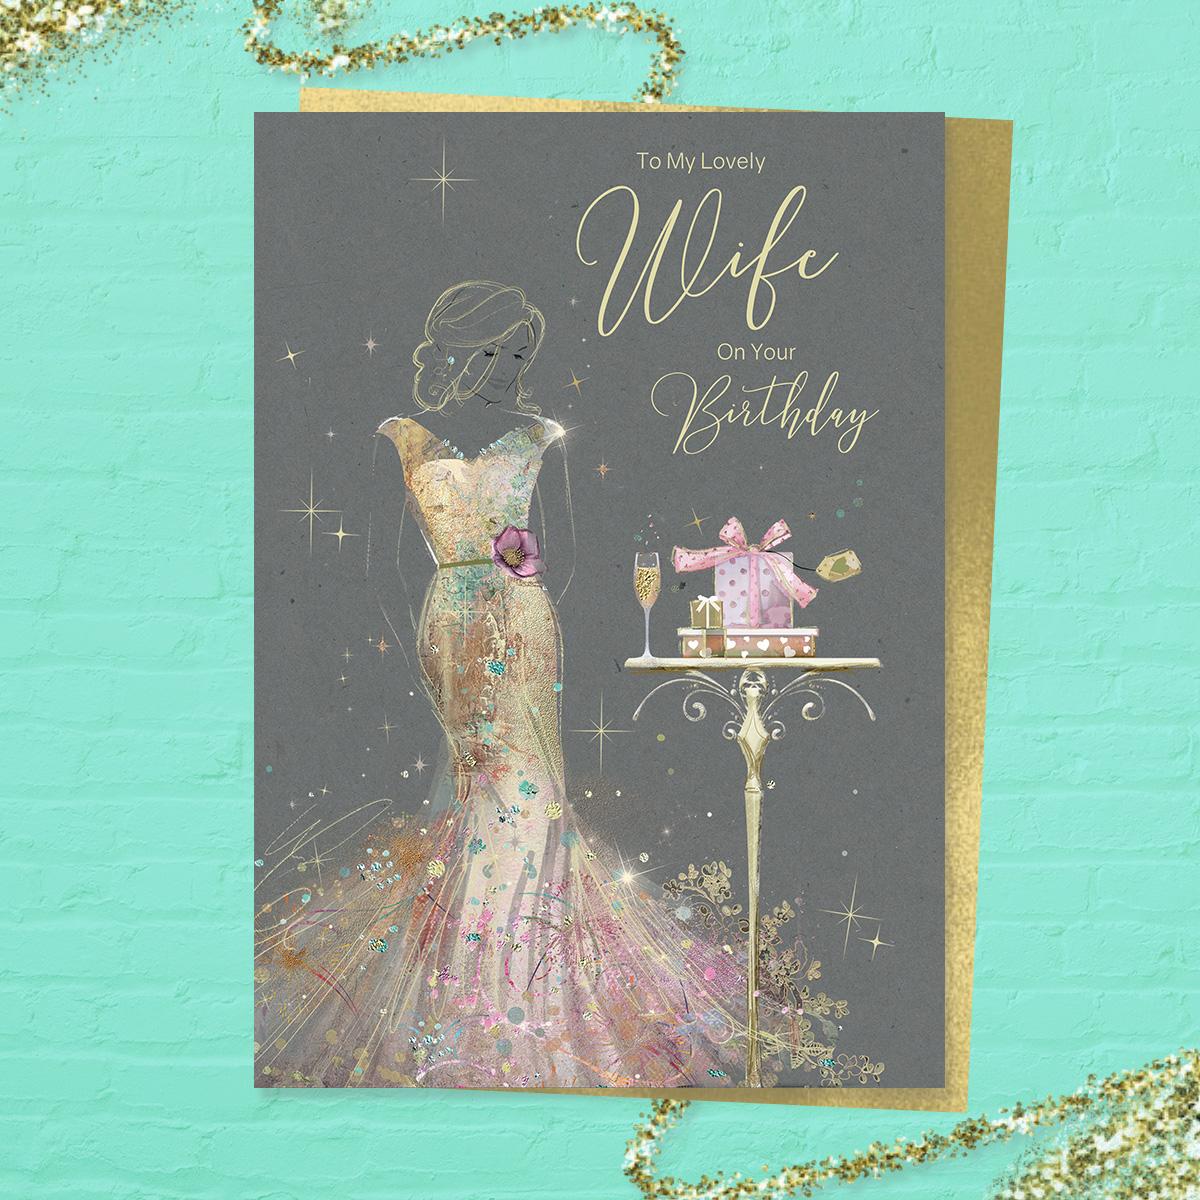 'To My Lovely Wife On Your Birthday' card featuring a beautiful lady in a long gold dress with champagne and gifts. With added sparkle and gold foil detail. Colour image inside with heartfelt verse. Complete with gold colour envelope